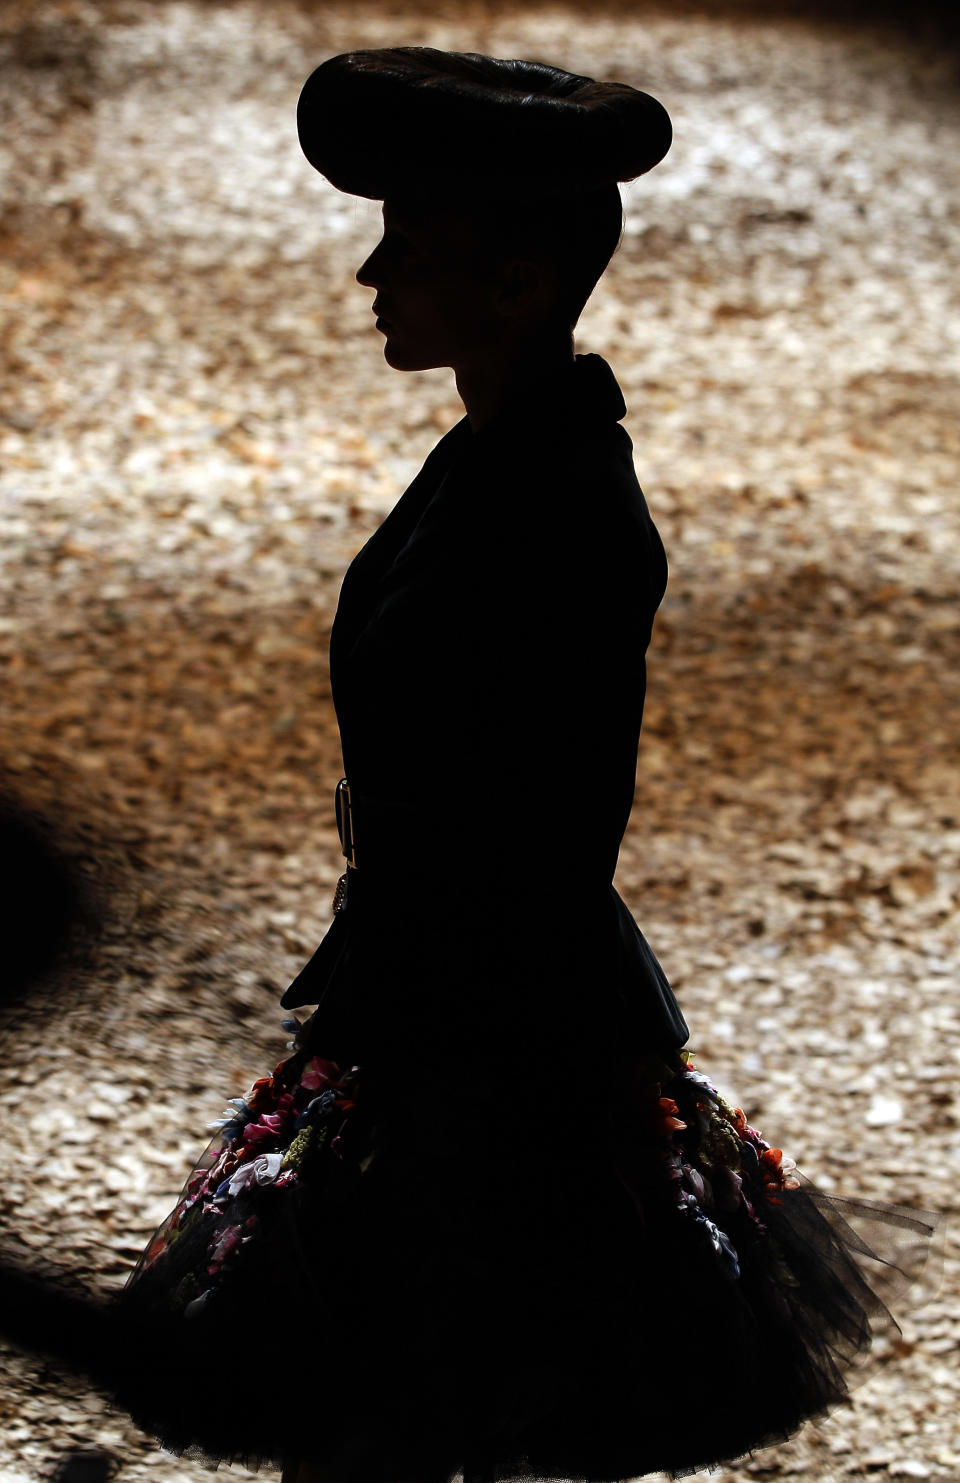 A models displays a creation by designer McQ Alexander McQueen during a fashion show at London Fashion Week, Monday, Feb. 20, 2012. (AP Photo/Kirsty Wigglesworth)